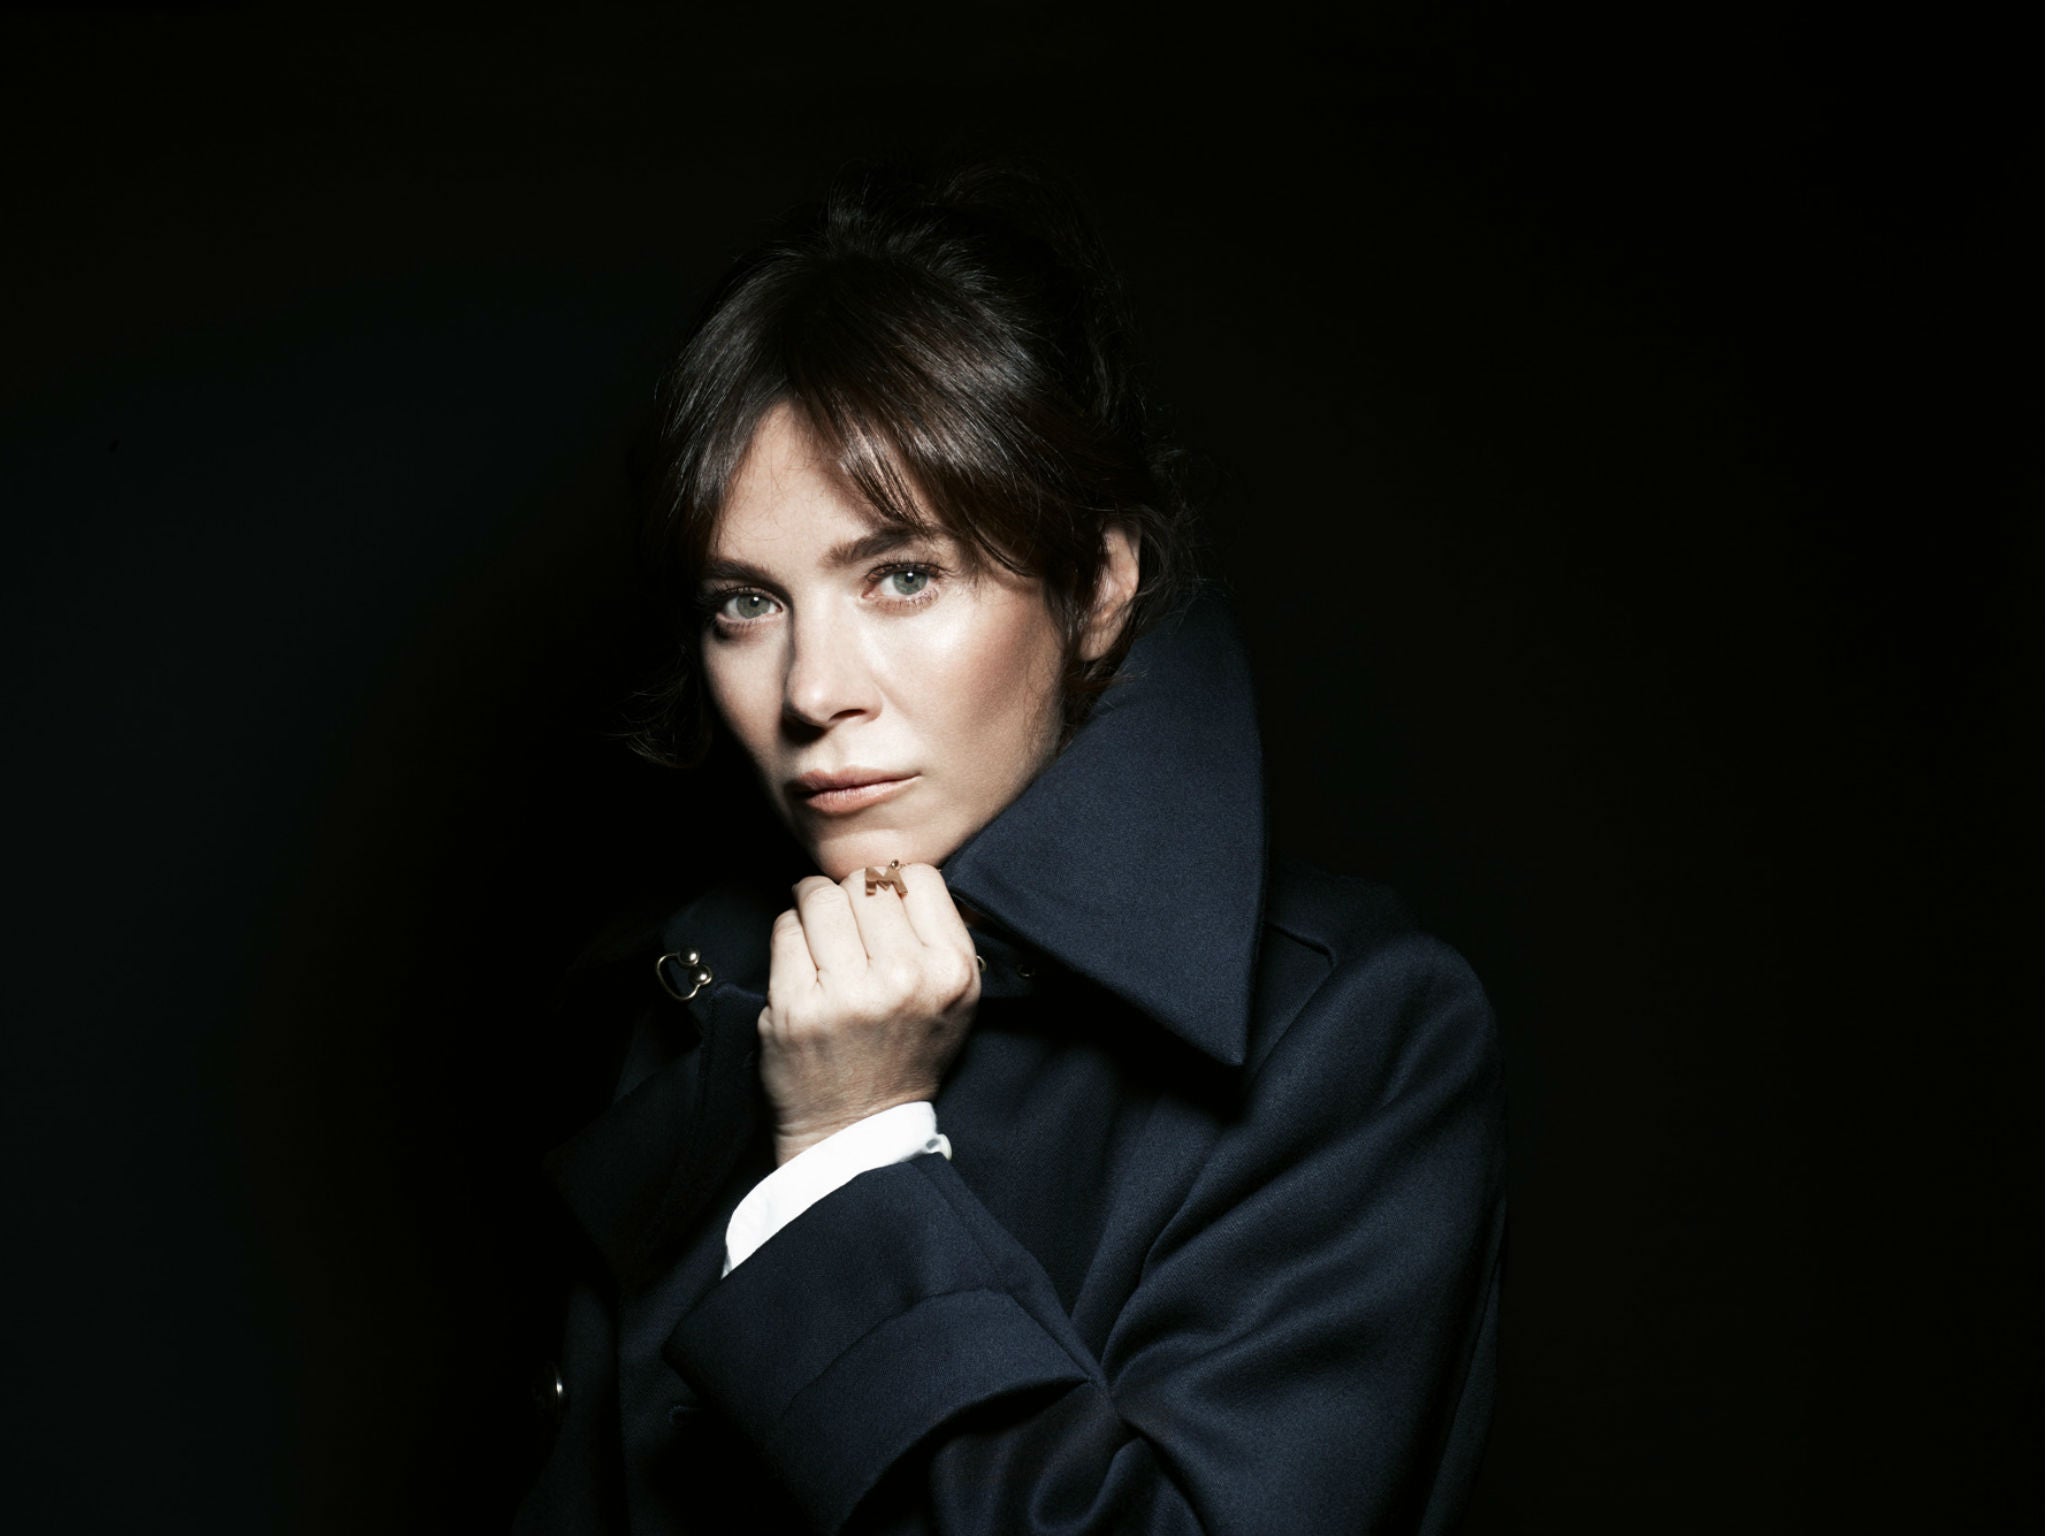 Anna Friel on Marcella, The Girlfriend Experience and breaking sexual taboos on TV The Independent The Independent image photo